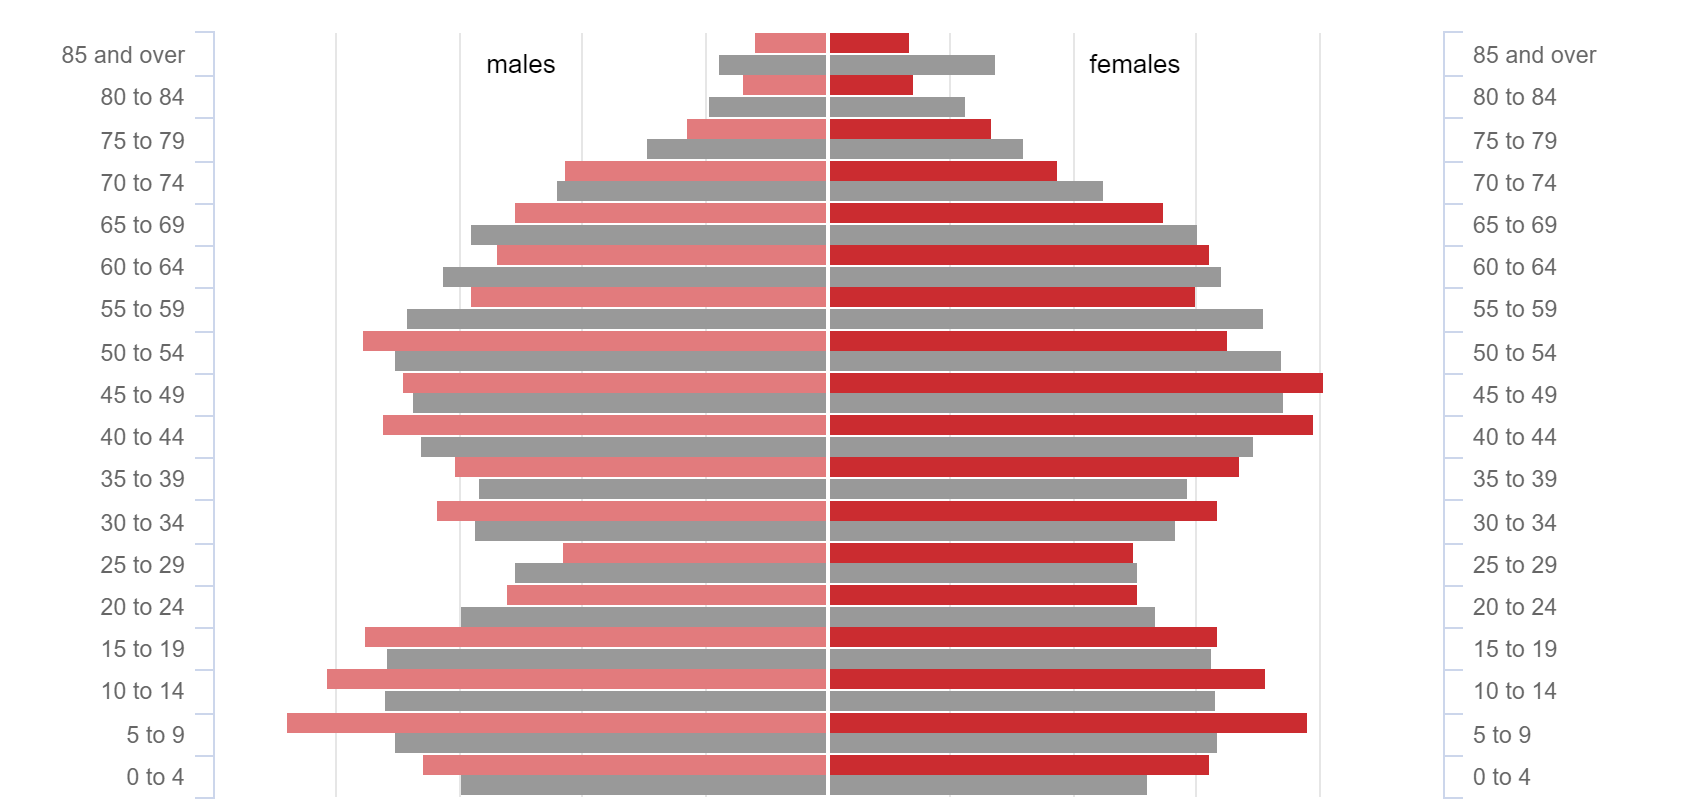 Animated population pyramids - now in community profile